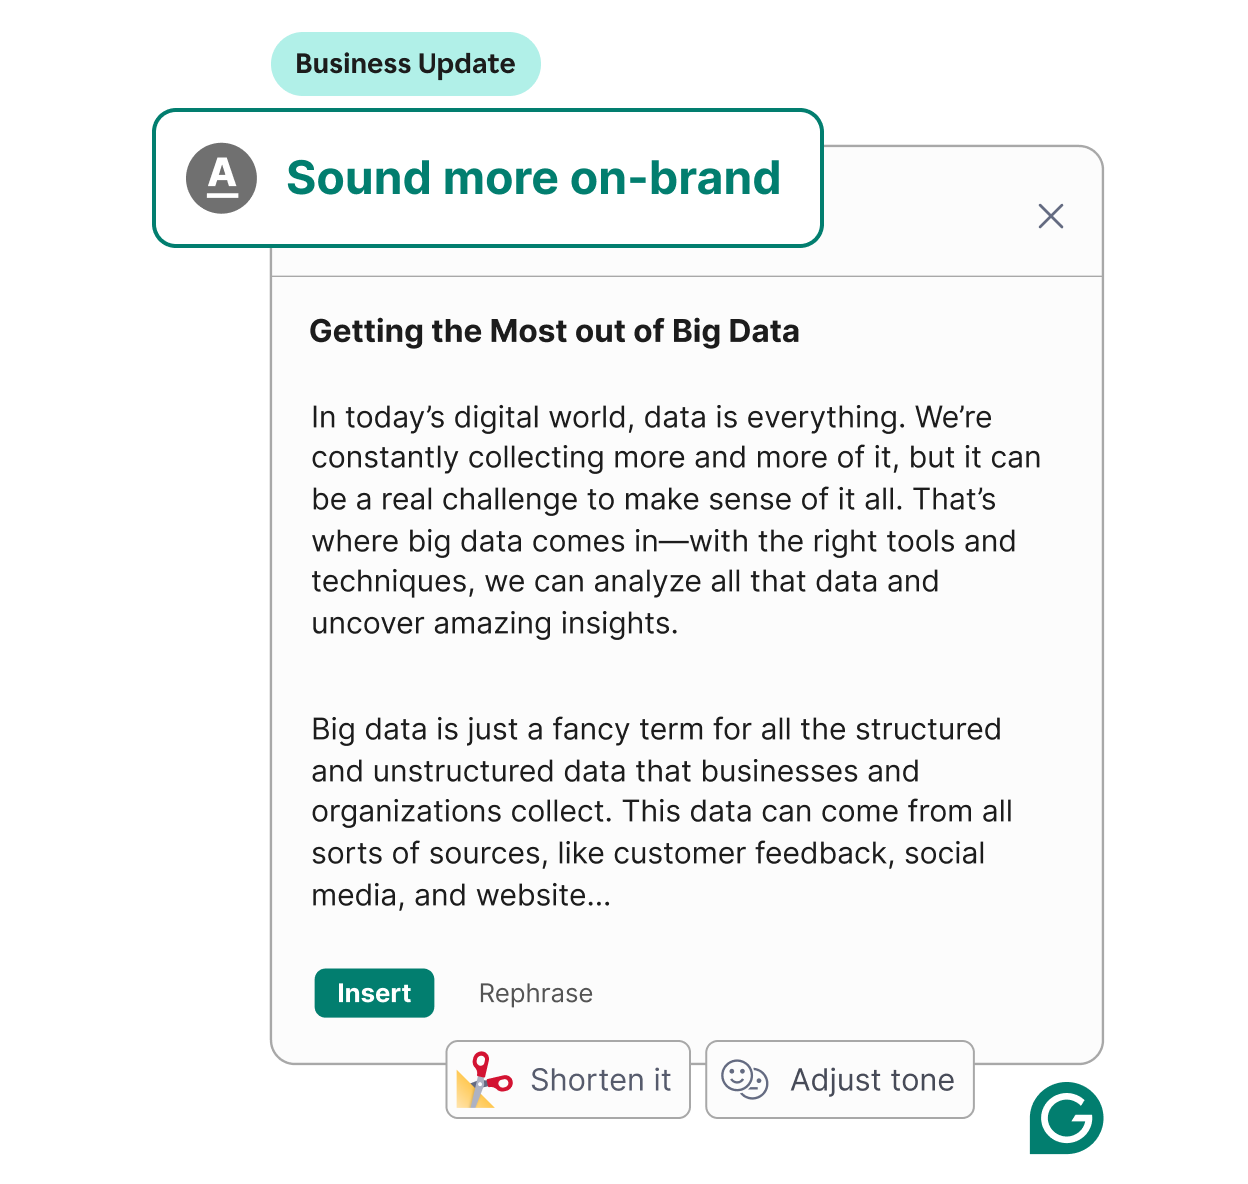 Grammarly helps adjust your text.